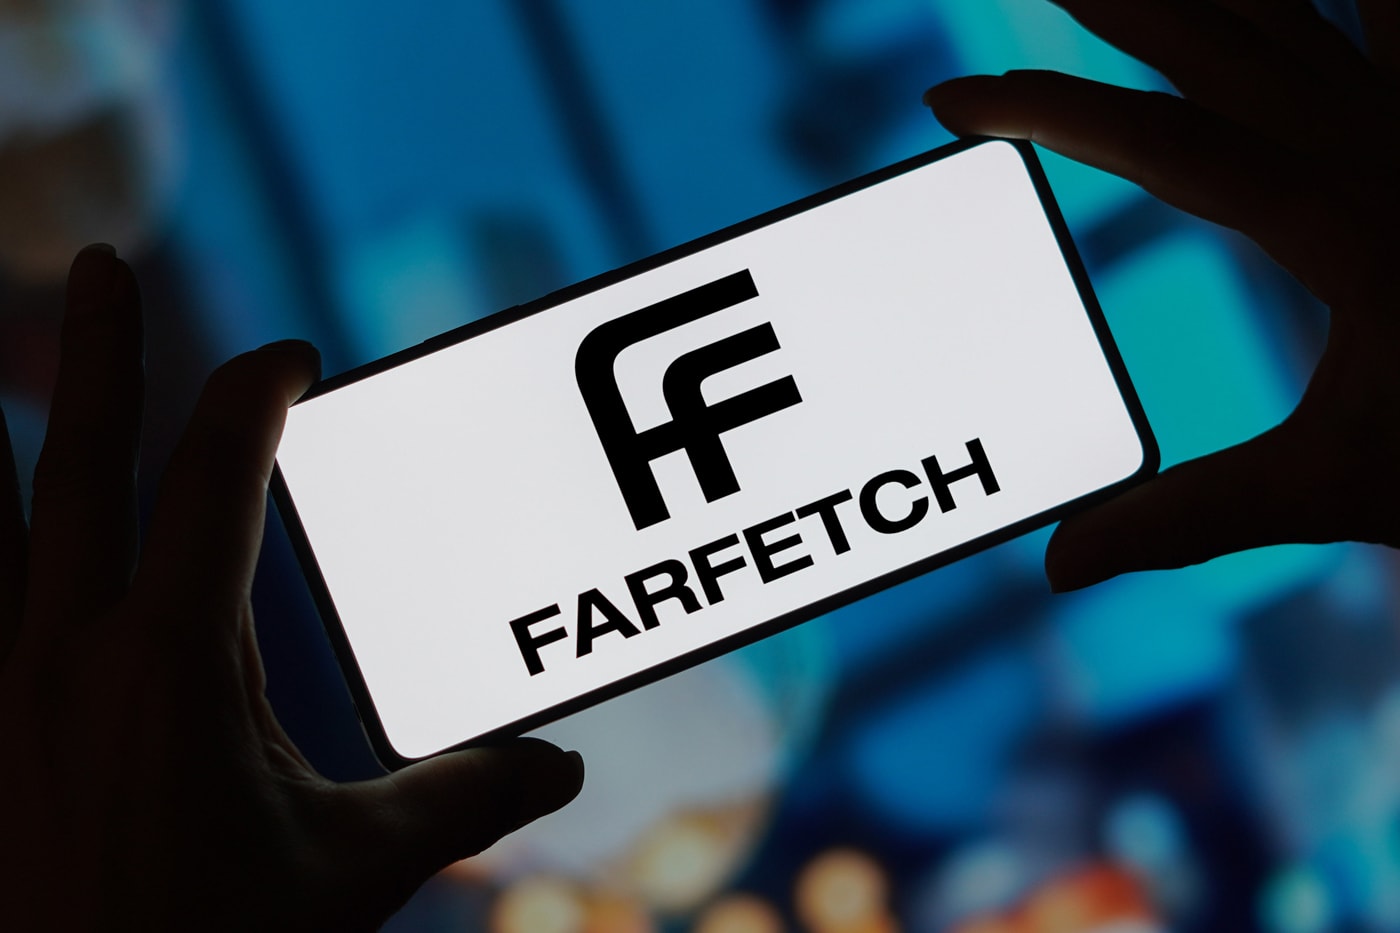 Farfetch Has Been Sold to South Korea E-Commerce Giant Coupang emergency funding richemont yoox net a porter